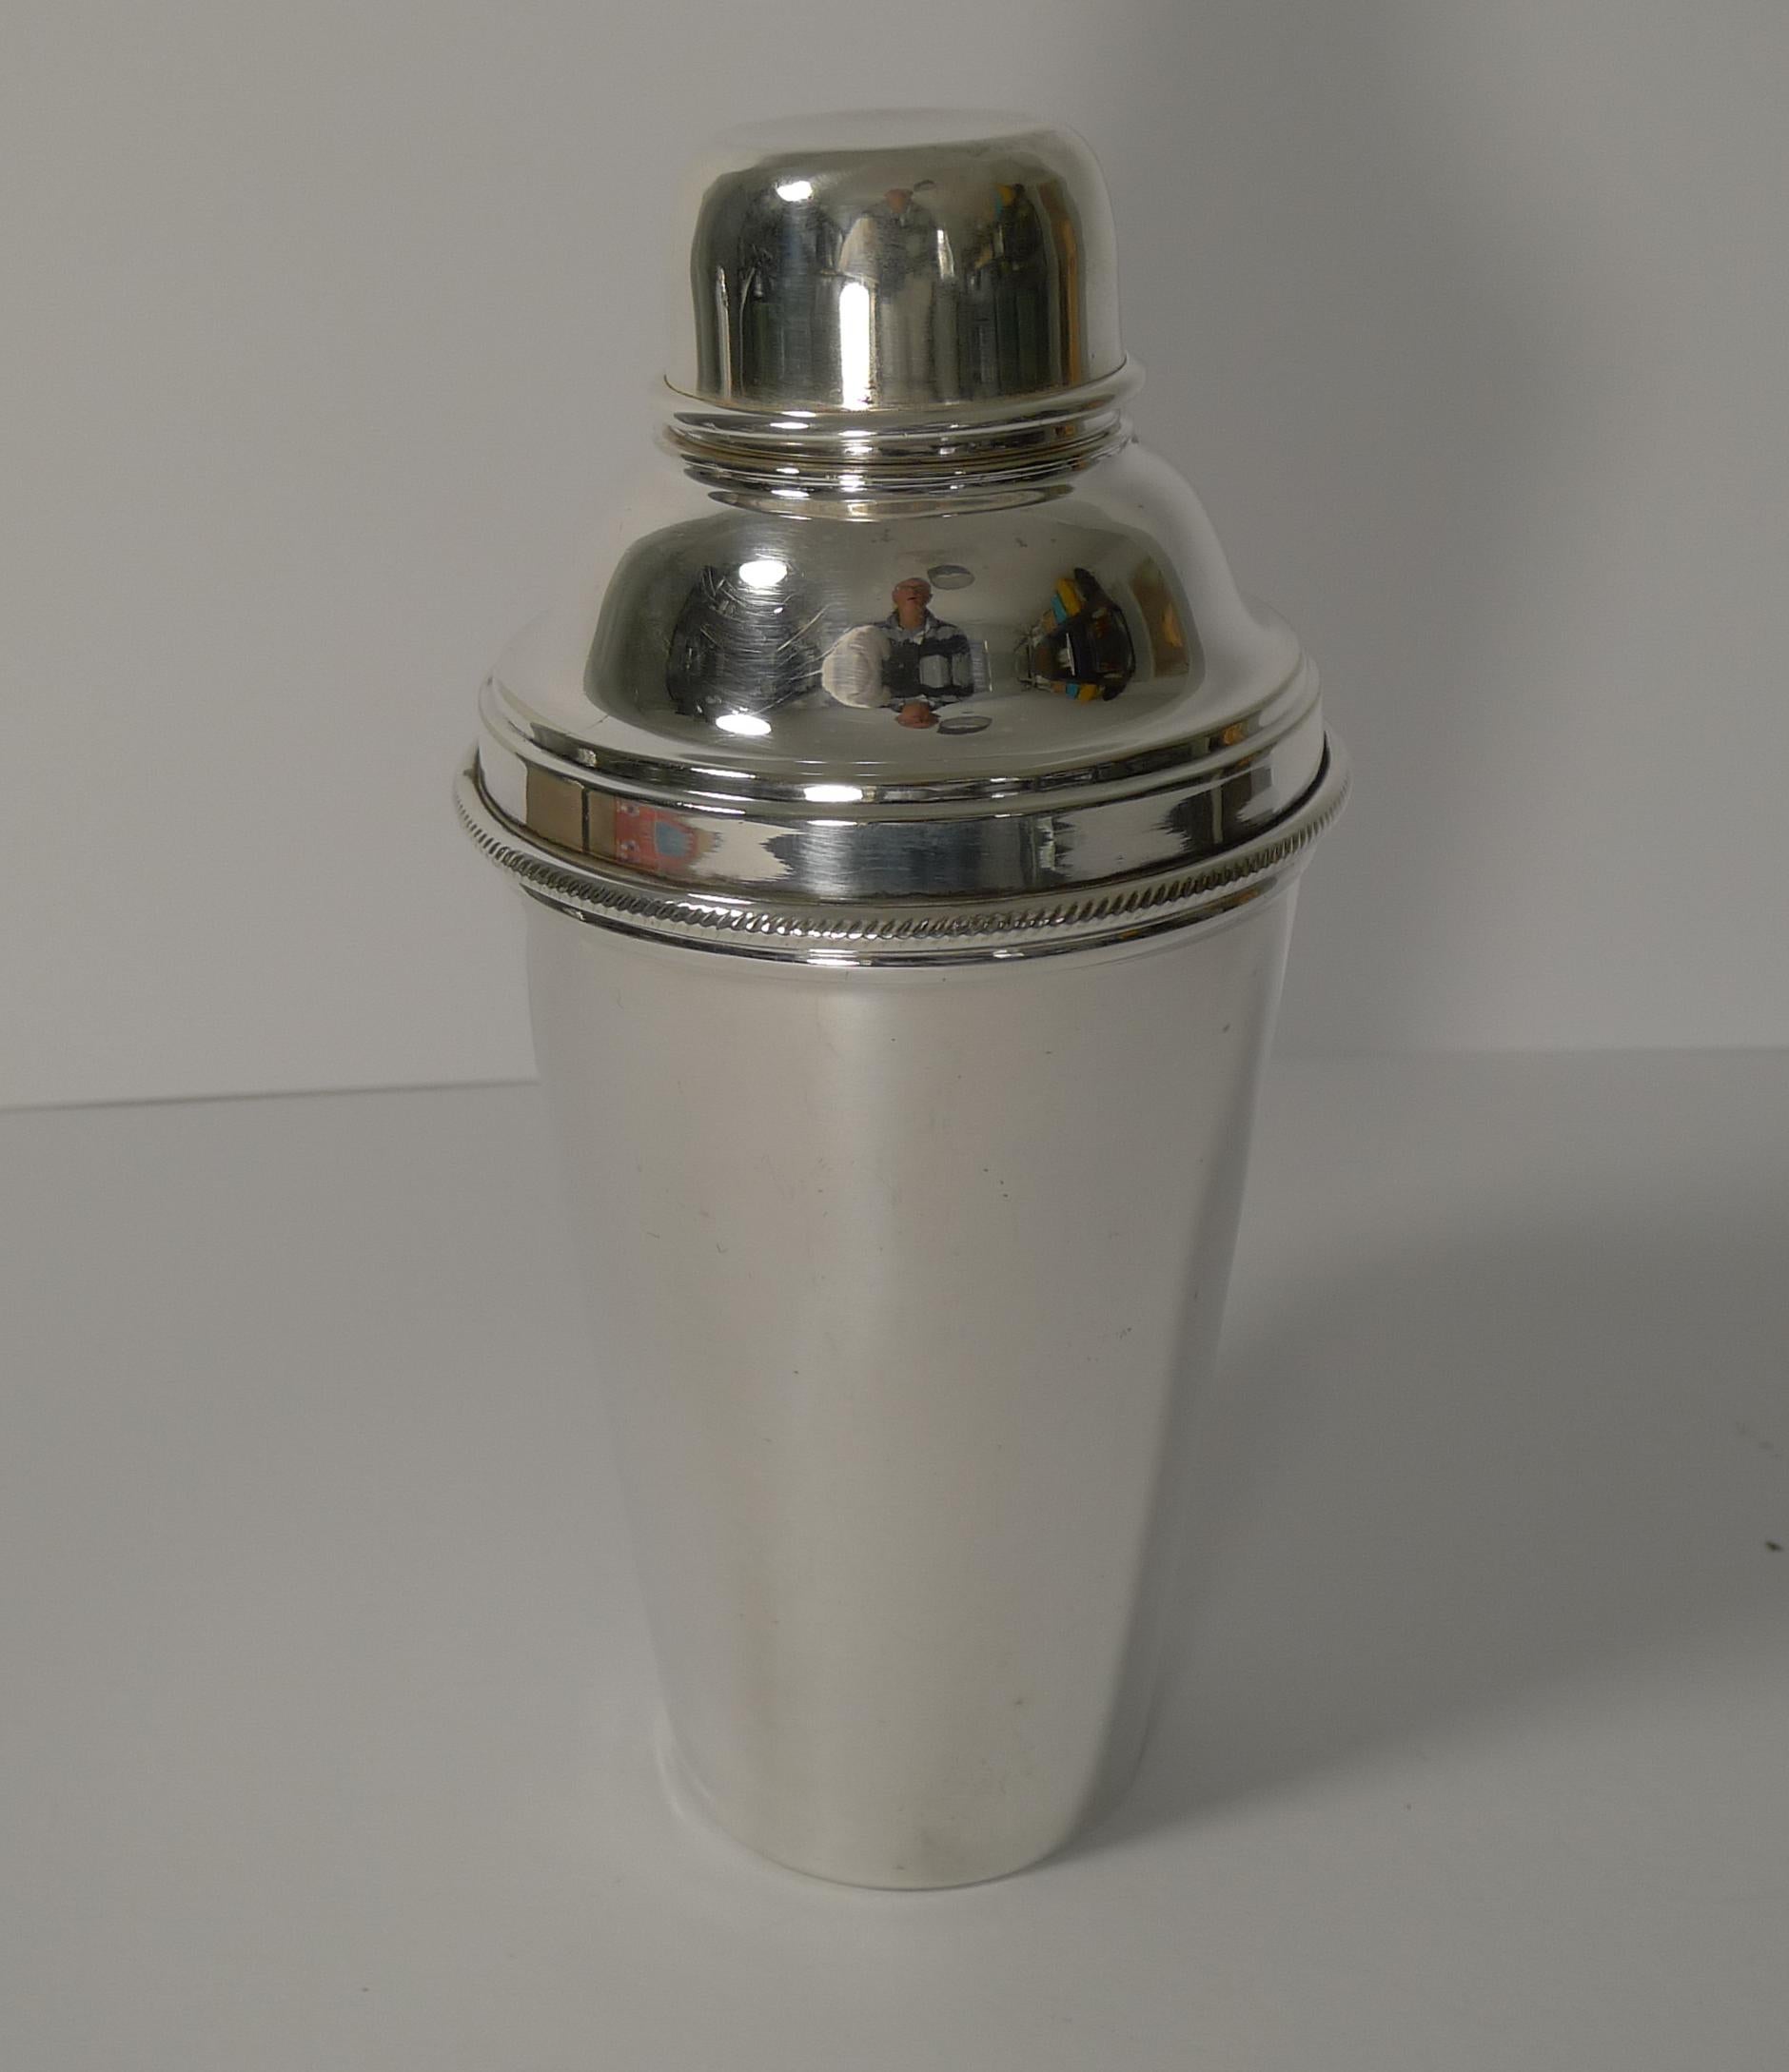 Always highly sought-after and hard to find, this vintage Art Deco cocktail shaker has an integral lemon squeezer or reamer built into the top section of the shaker.

Made from English silver plate, it is fully marked on the underside for the